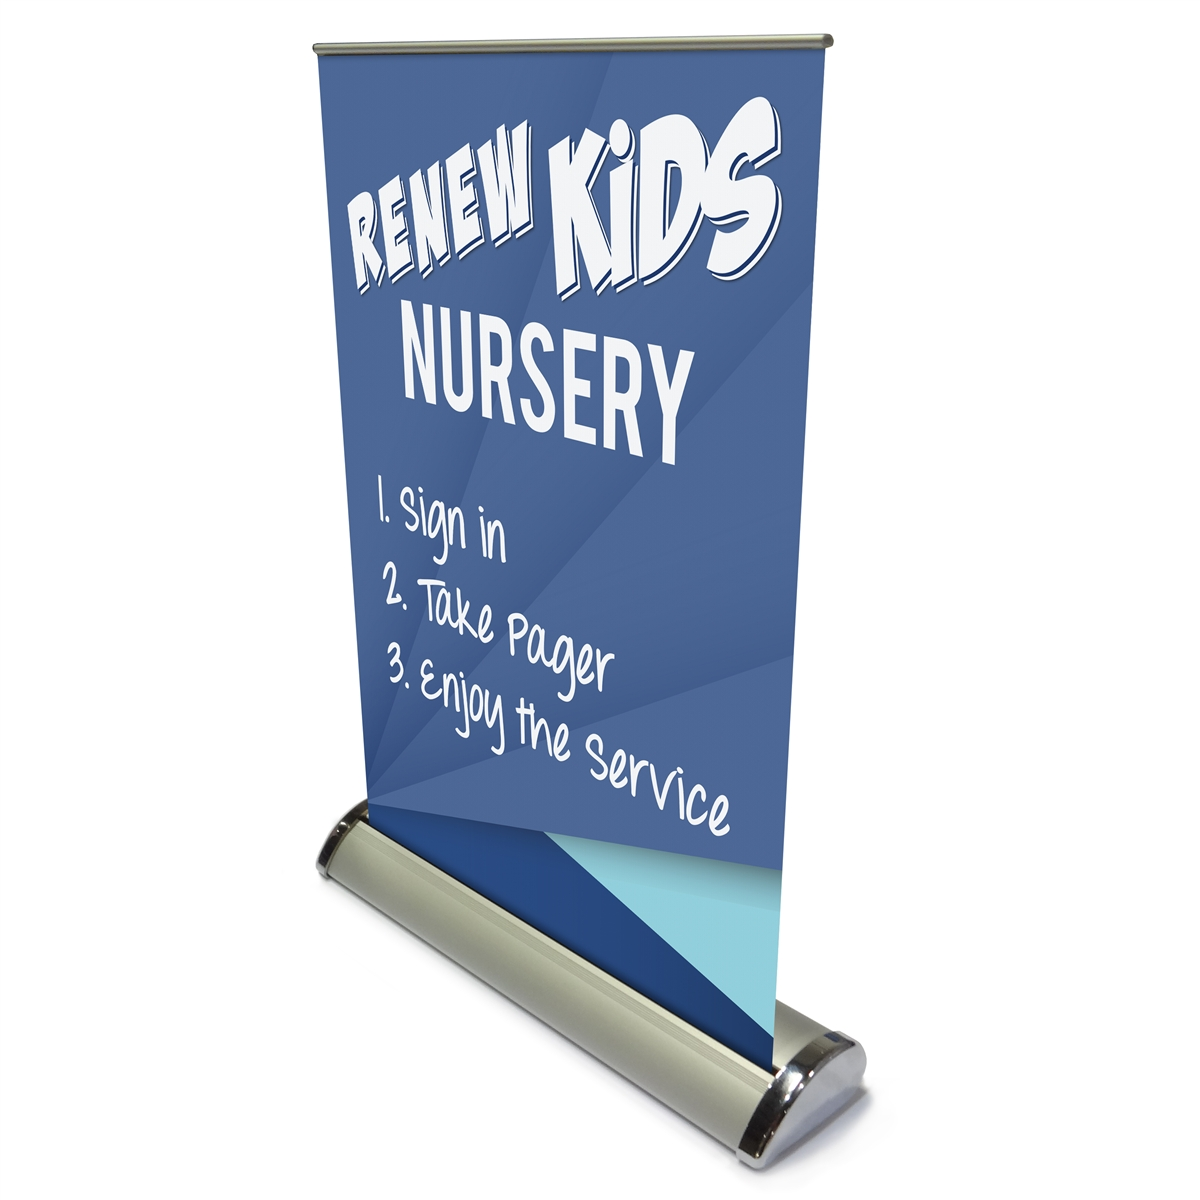 Church Table Top Retractable Banners - Louisiana Sign Guy | Signs, Cards, Billboards, and Brochures